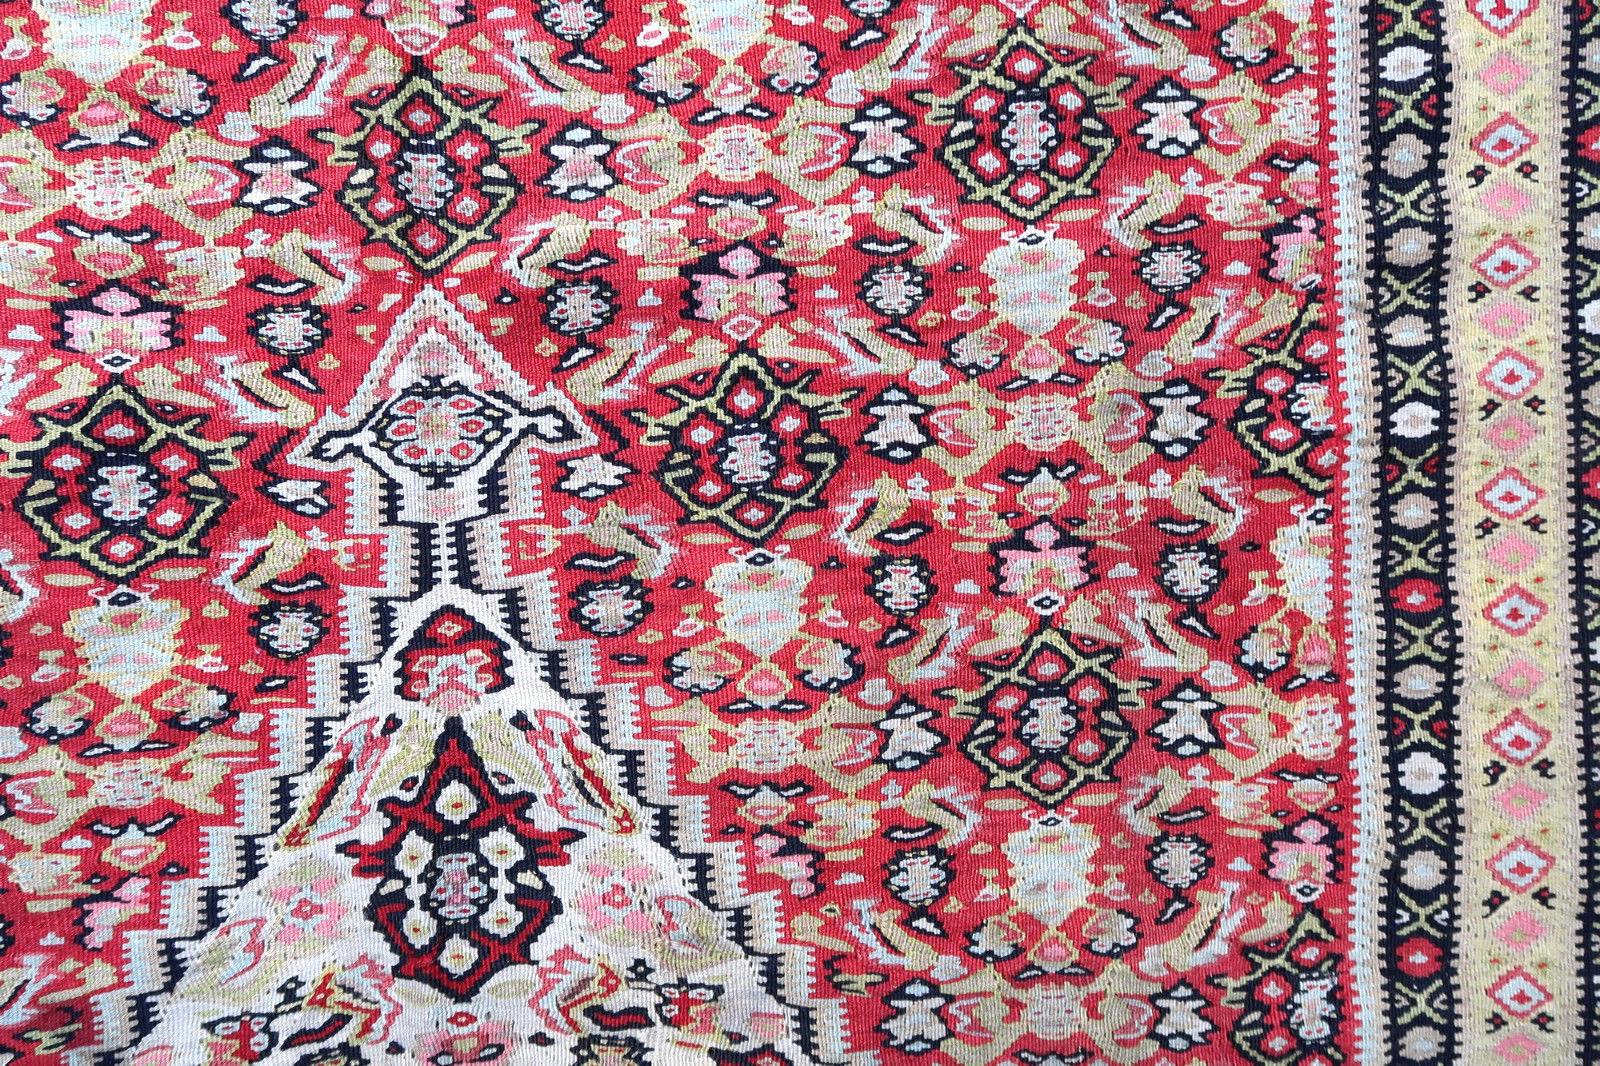 Handmade antique kilim from Middle East in red and colour. The rug is from the beginning of 20th century in original good condition ( it always has been hung on the wall).

?-condition: original good, 

-circa: 1920s,

-size: 3.9' x 6.4'